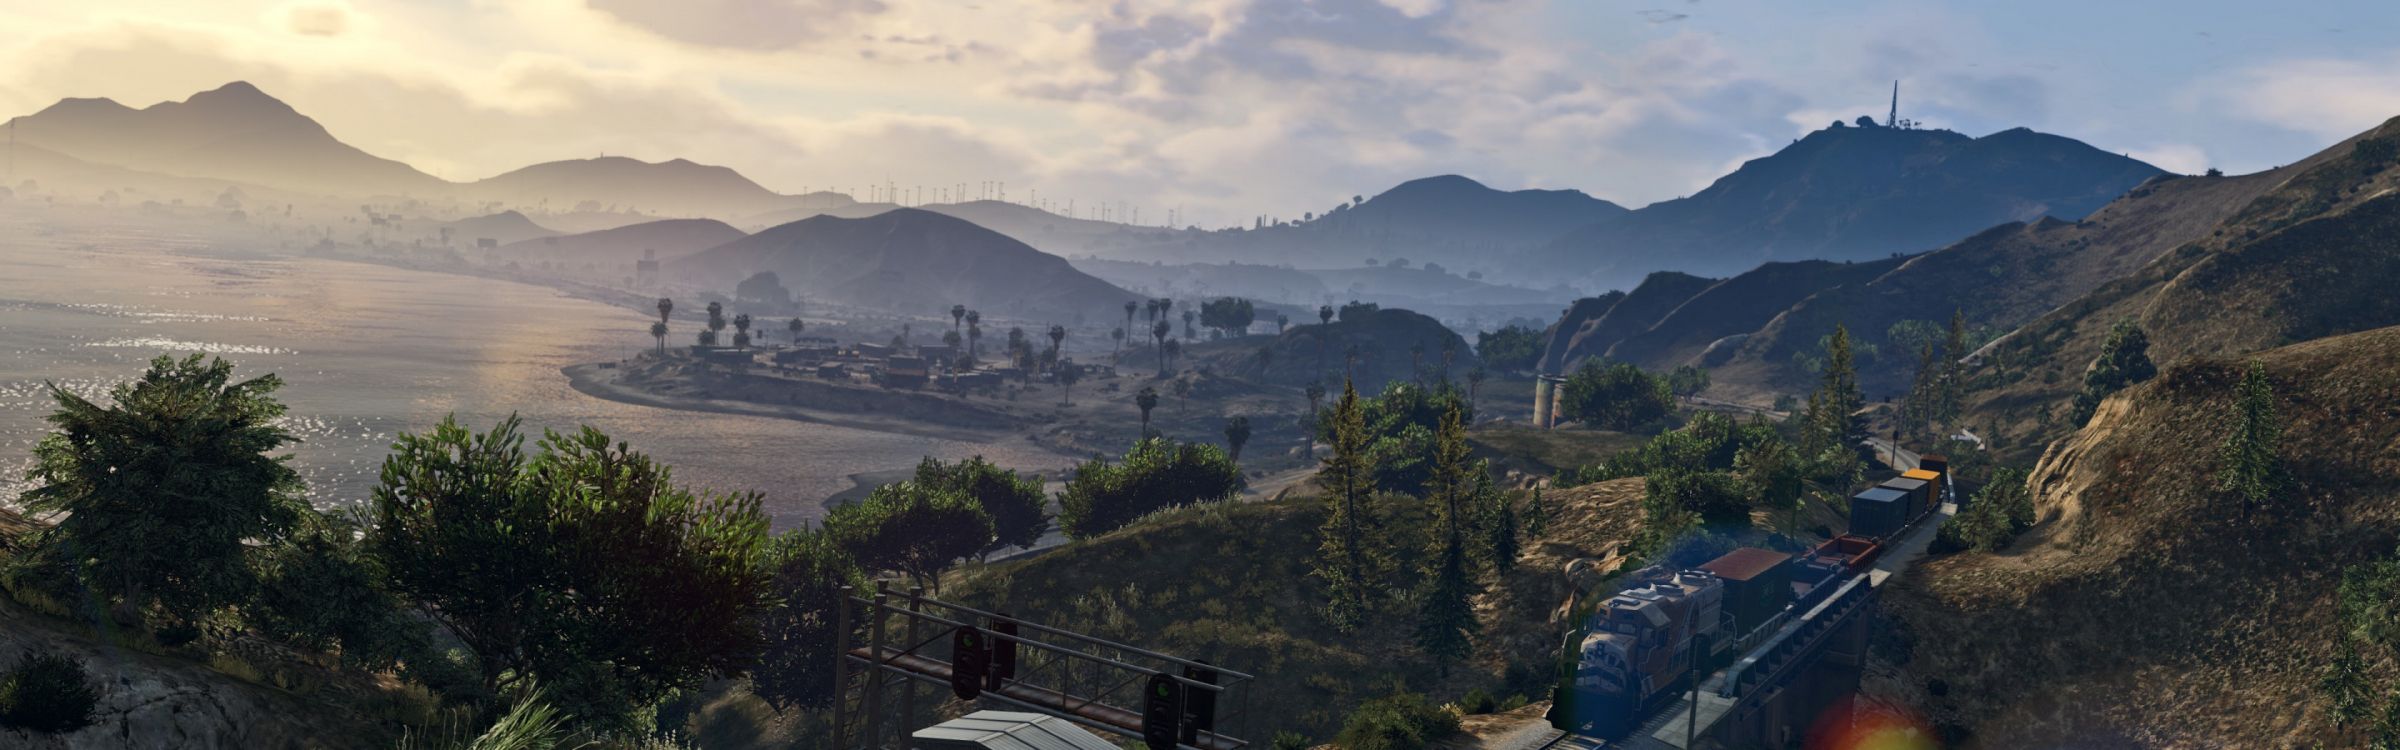 Grand Theft Auto v, Rockstar Games, Playstation 4, Les Reliefs Montagneux, Highland. Wallpaper in 3360x1050 Resolution